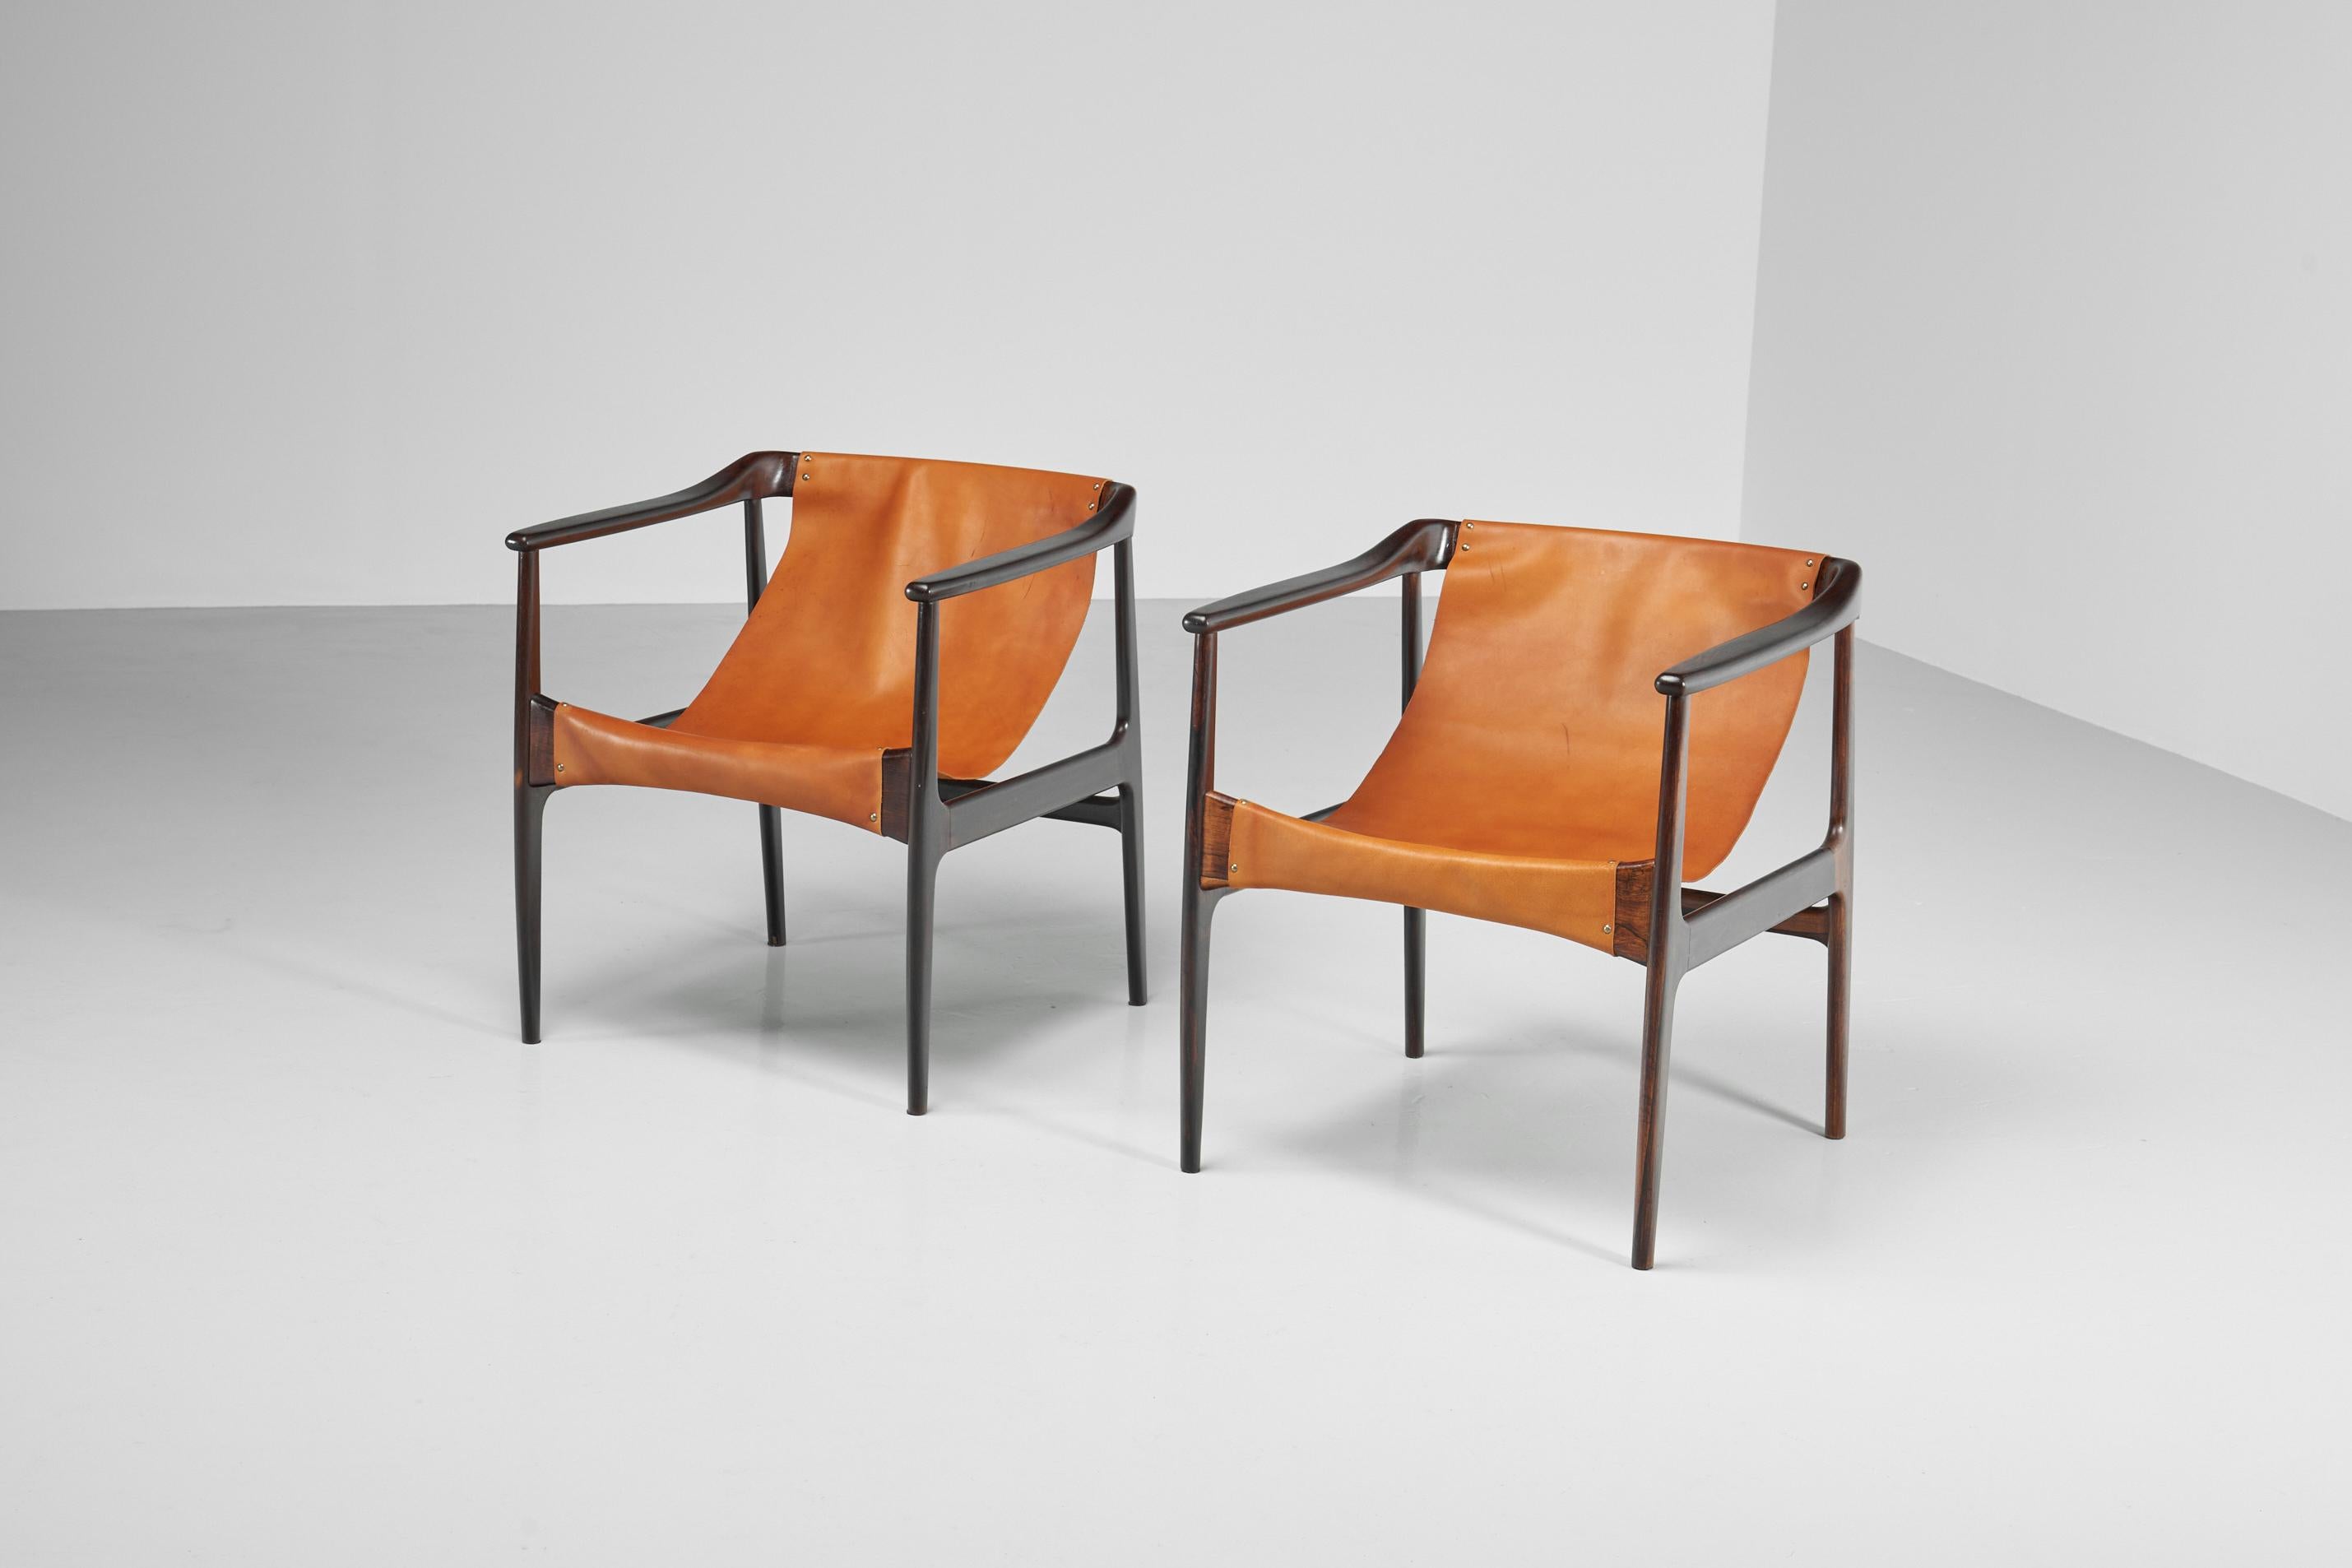 Striking pair of armchairs designed and made by Lice de Artes e Oficios, Brazil 1960. These lounge chairs made by Liceu de Artes e Officios have a beautiful patina and are in a very good, restored condition, no significant signs of heavy usage or